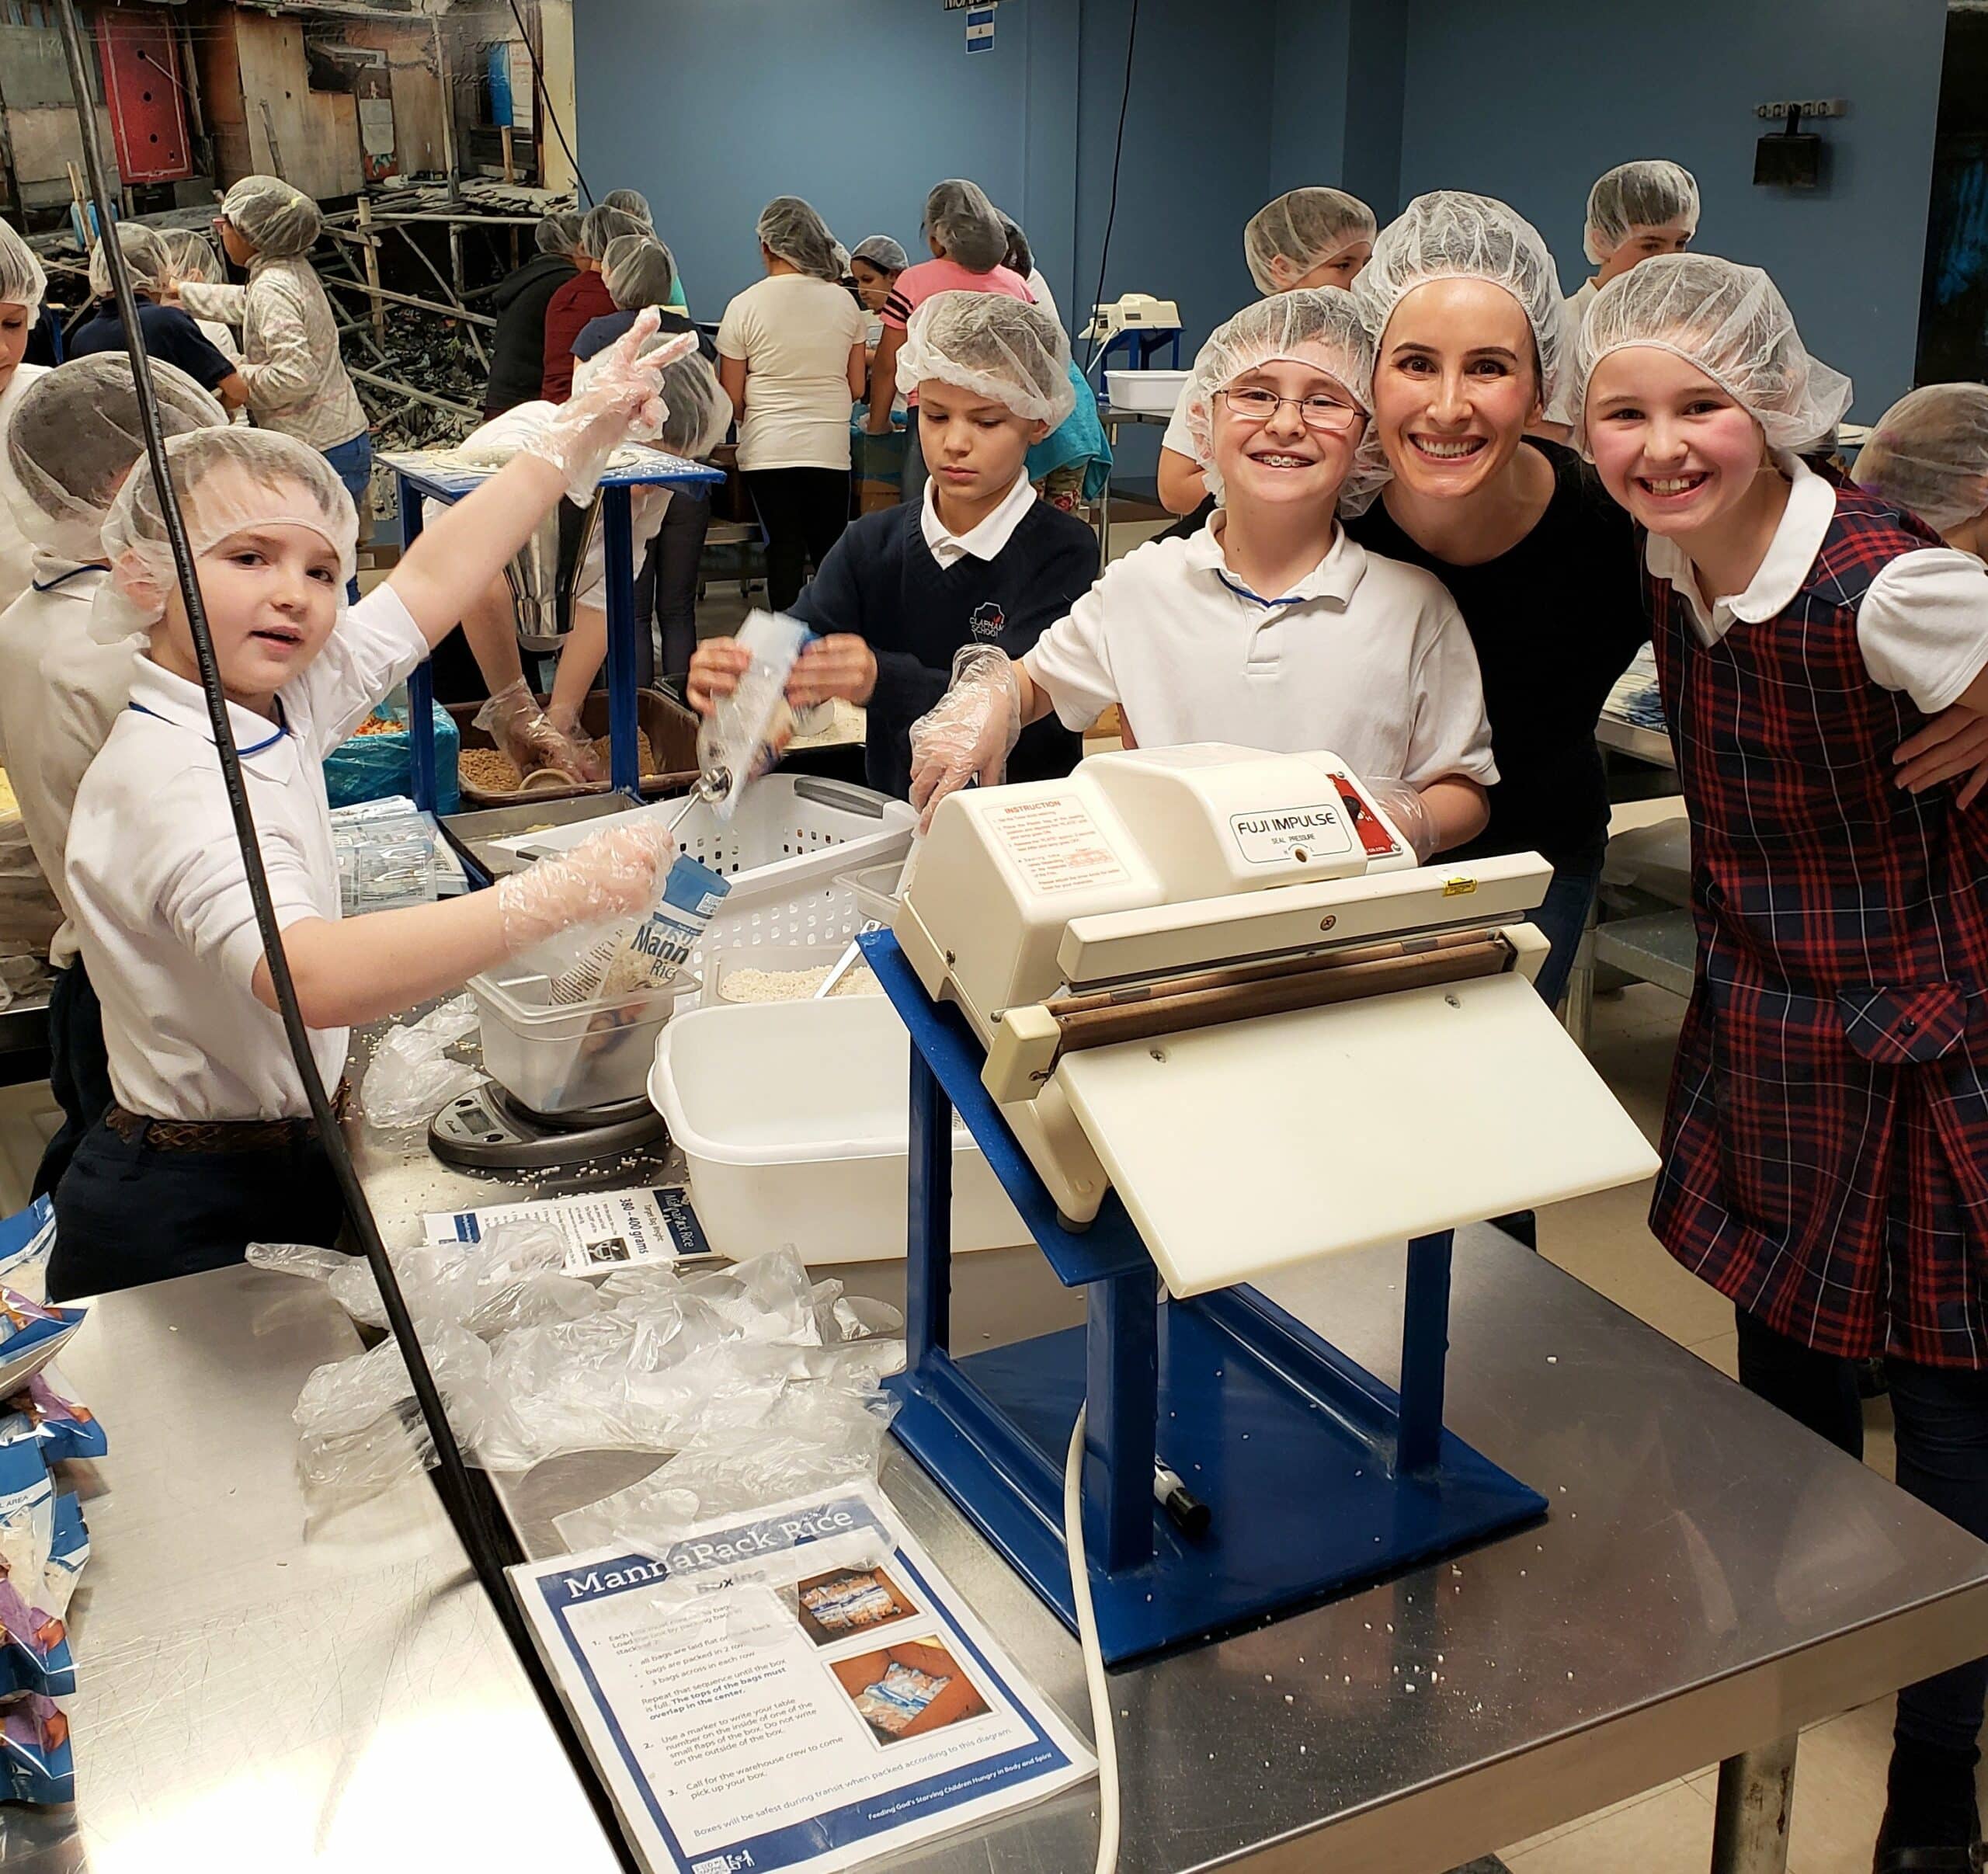 Stiernagles and group at FMSC